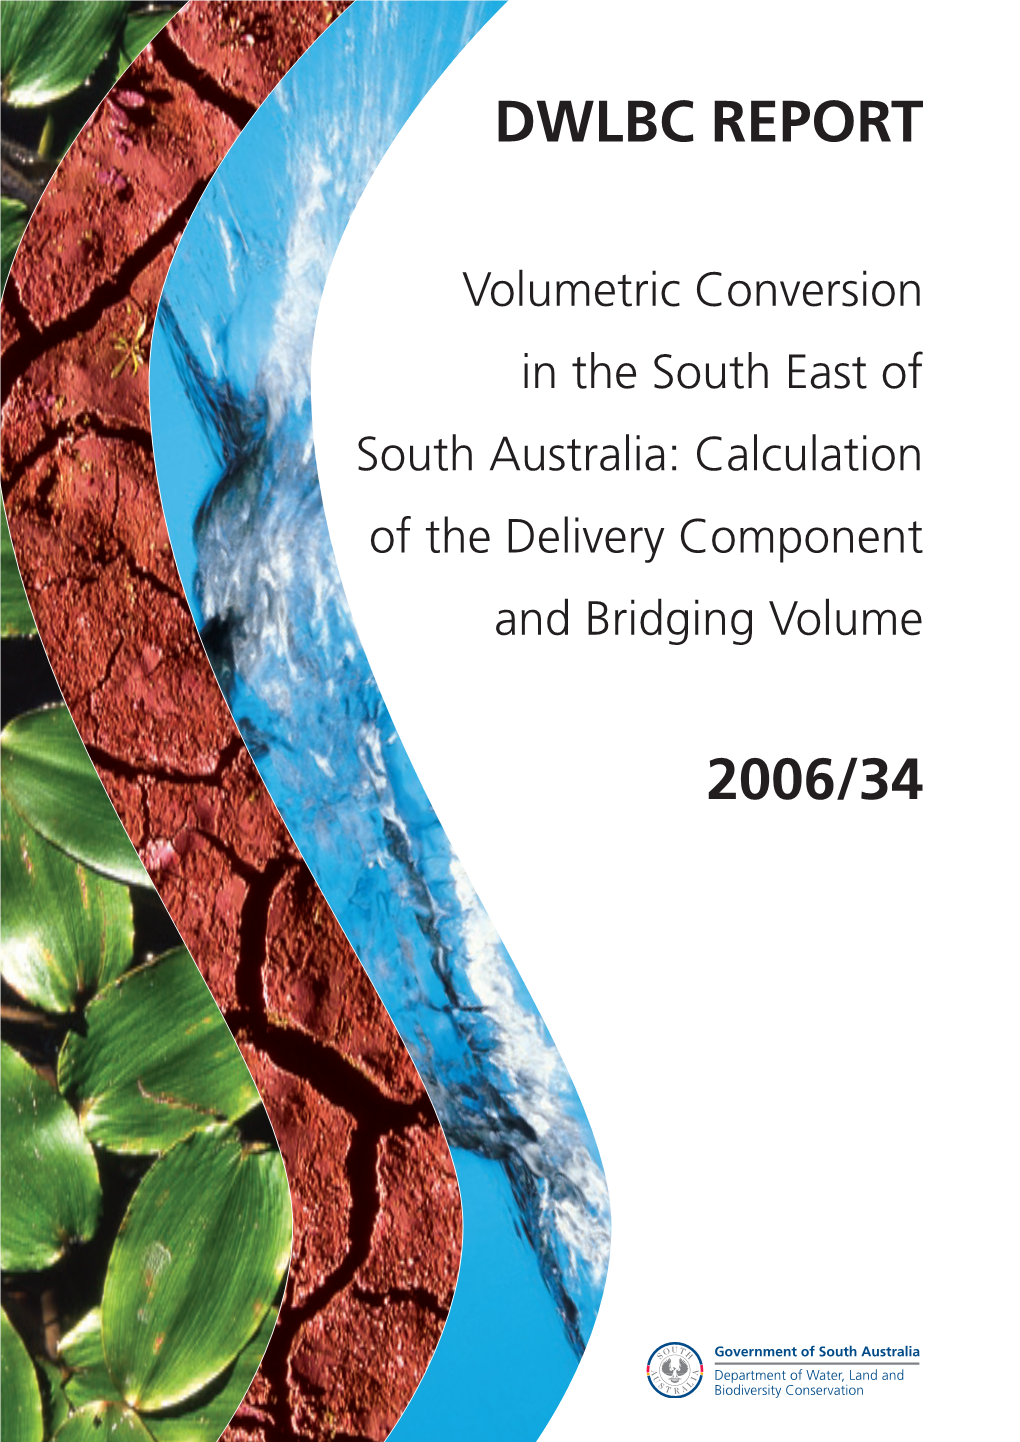 Volumetric Conversion in the South East of South Australia: Calculation of the Delivery Component and Bridging Volume